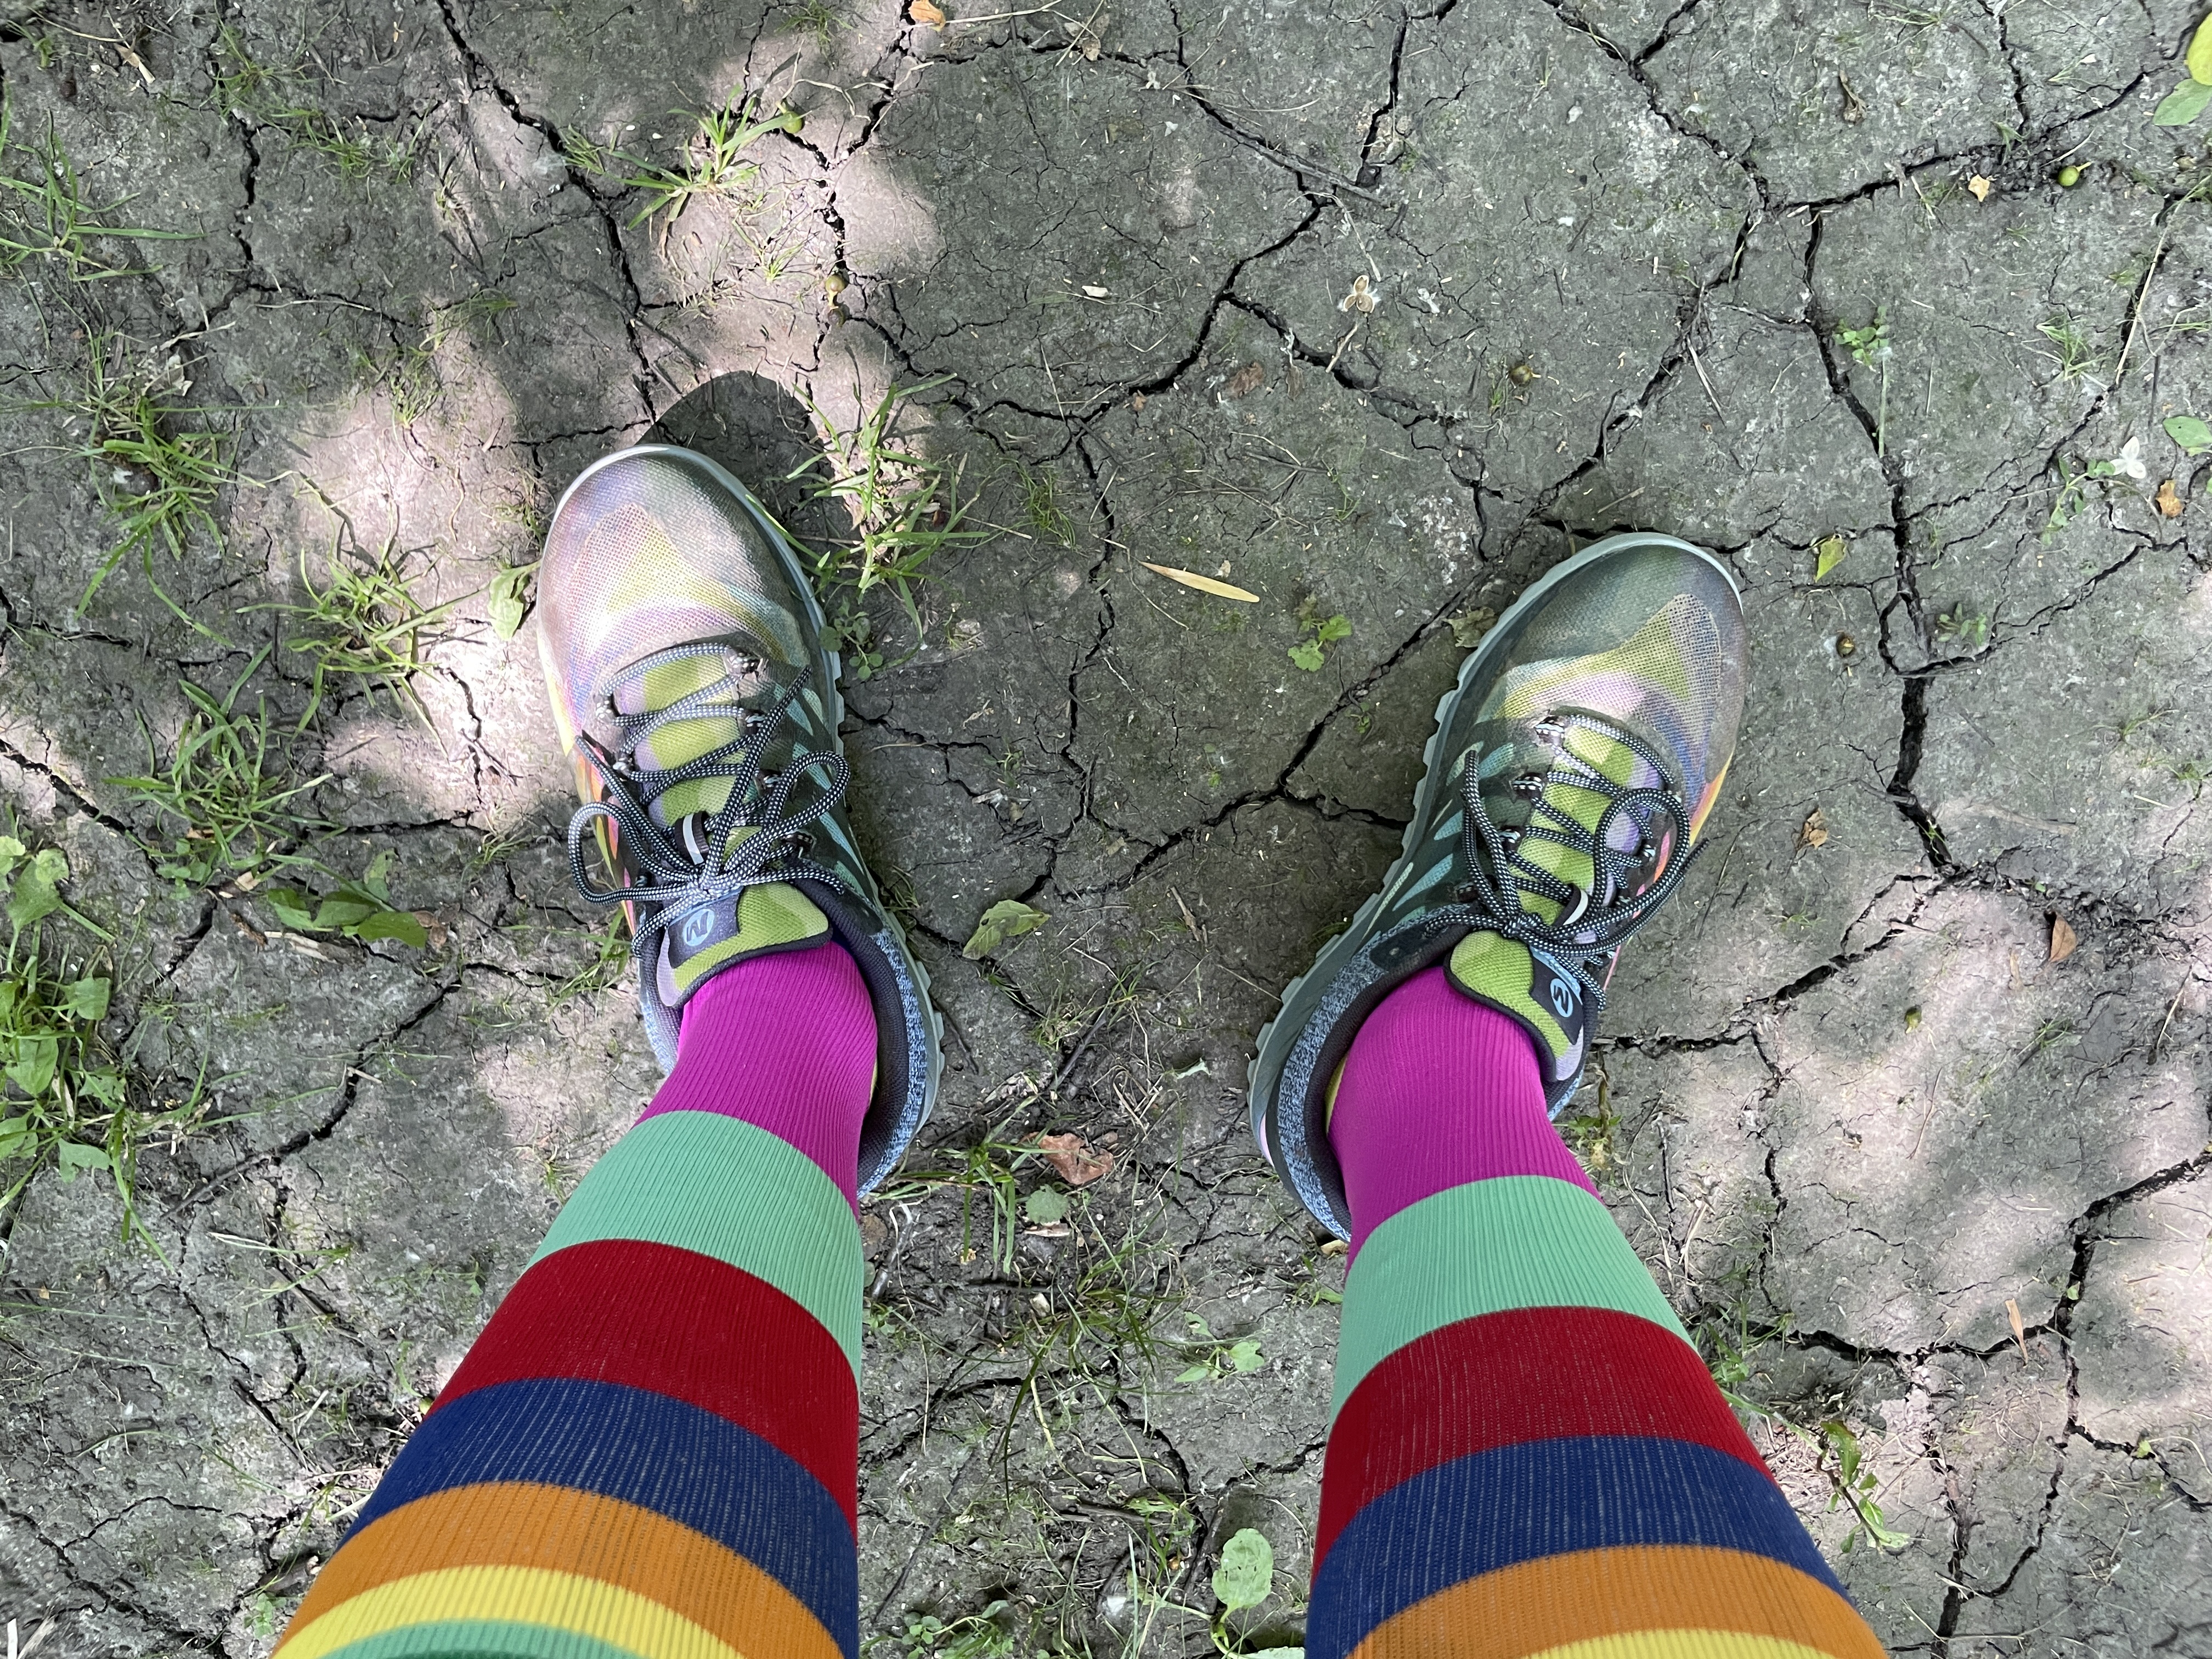 Photo of legs in colorful hiking shoes and socks standing on dry, cracked, brown dirt.